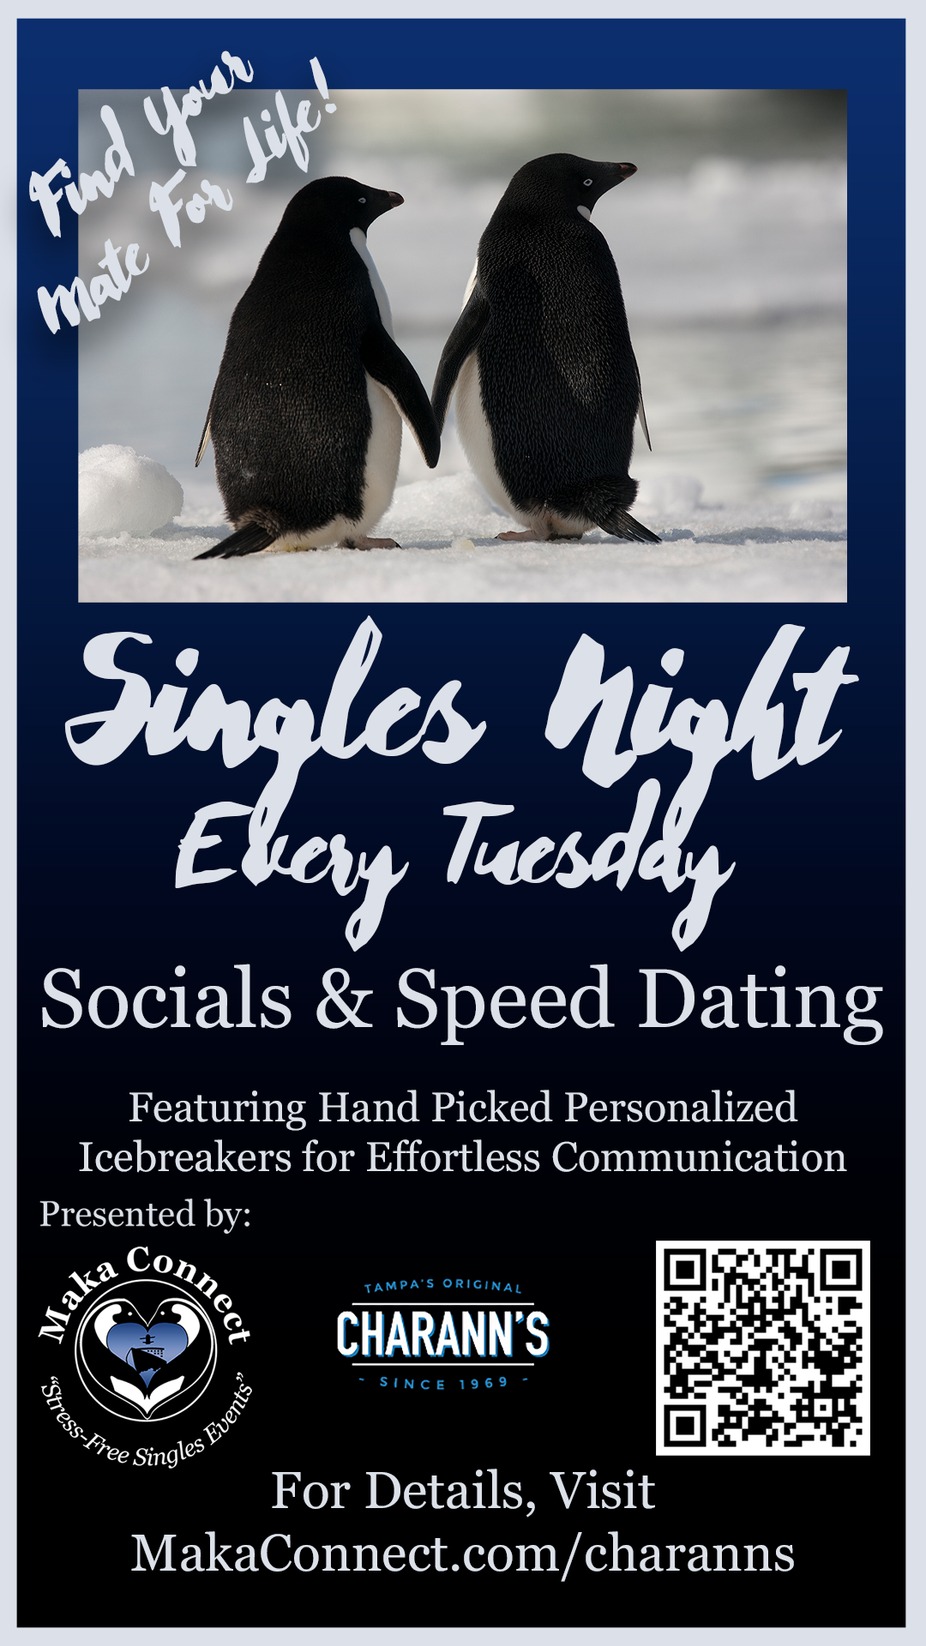 Weekly Singles Night event photo